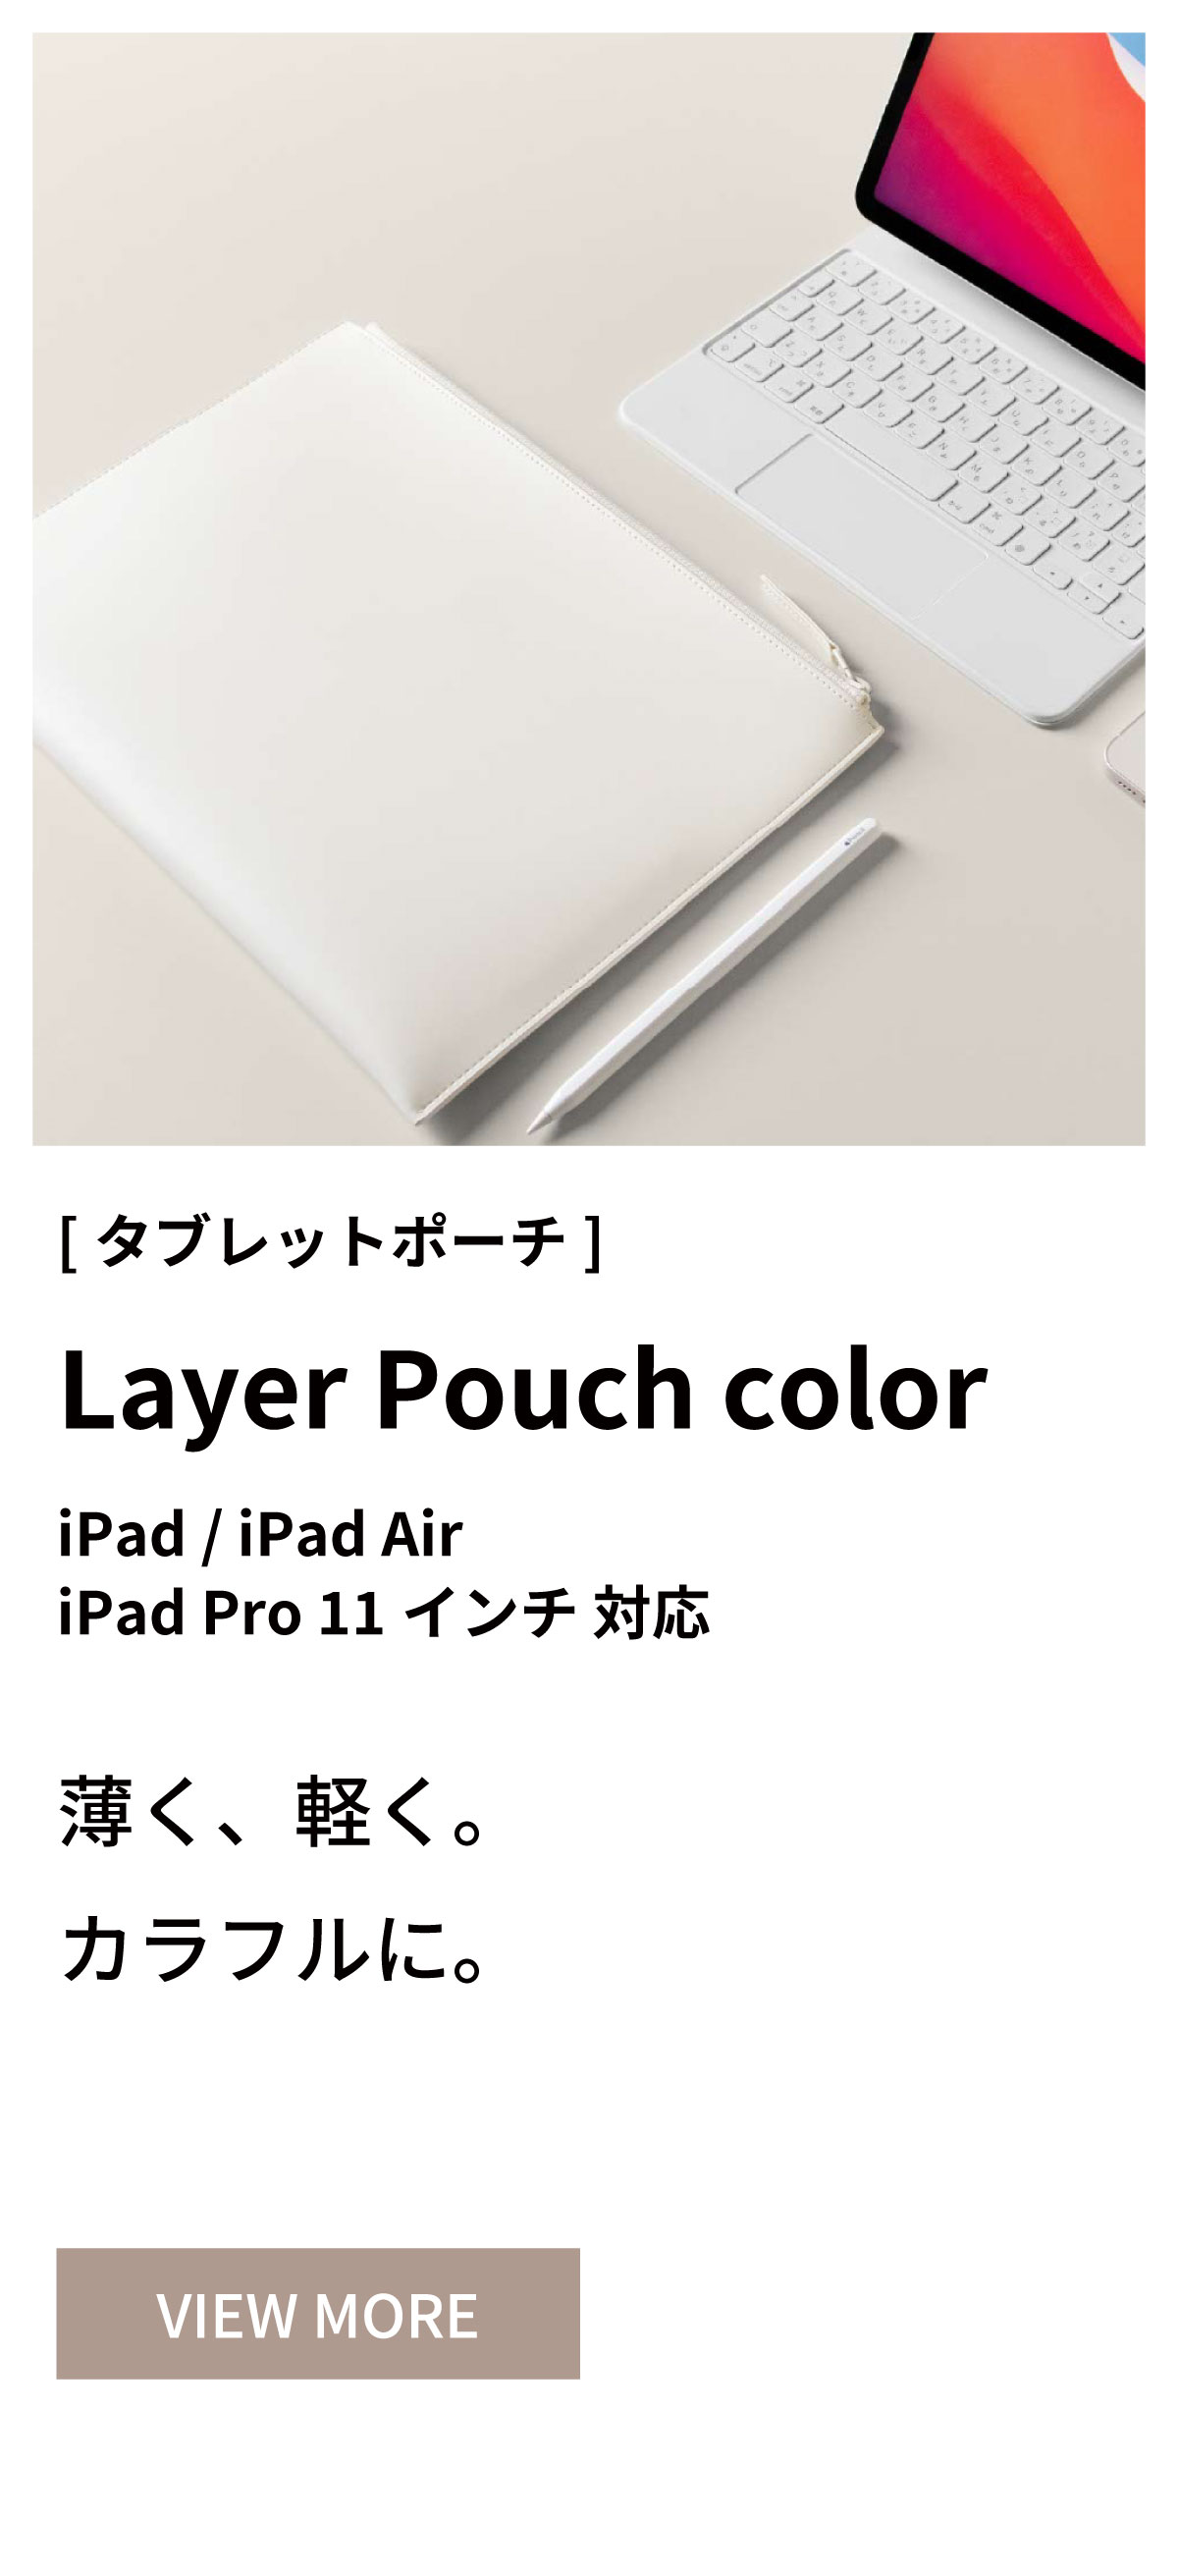 Layer Pouch color